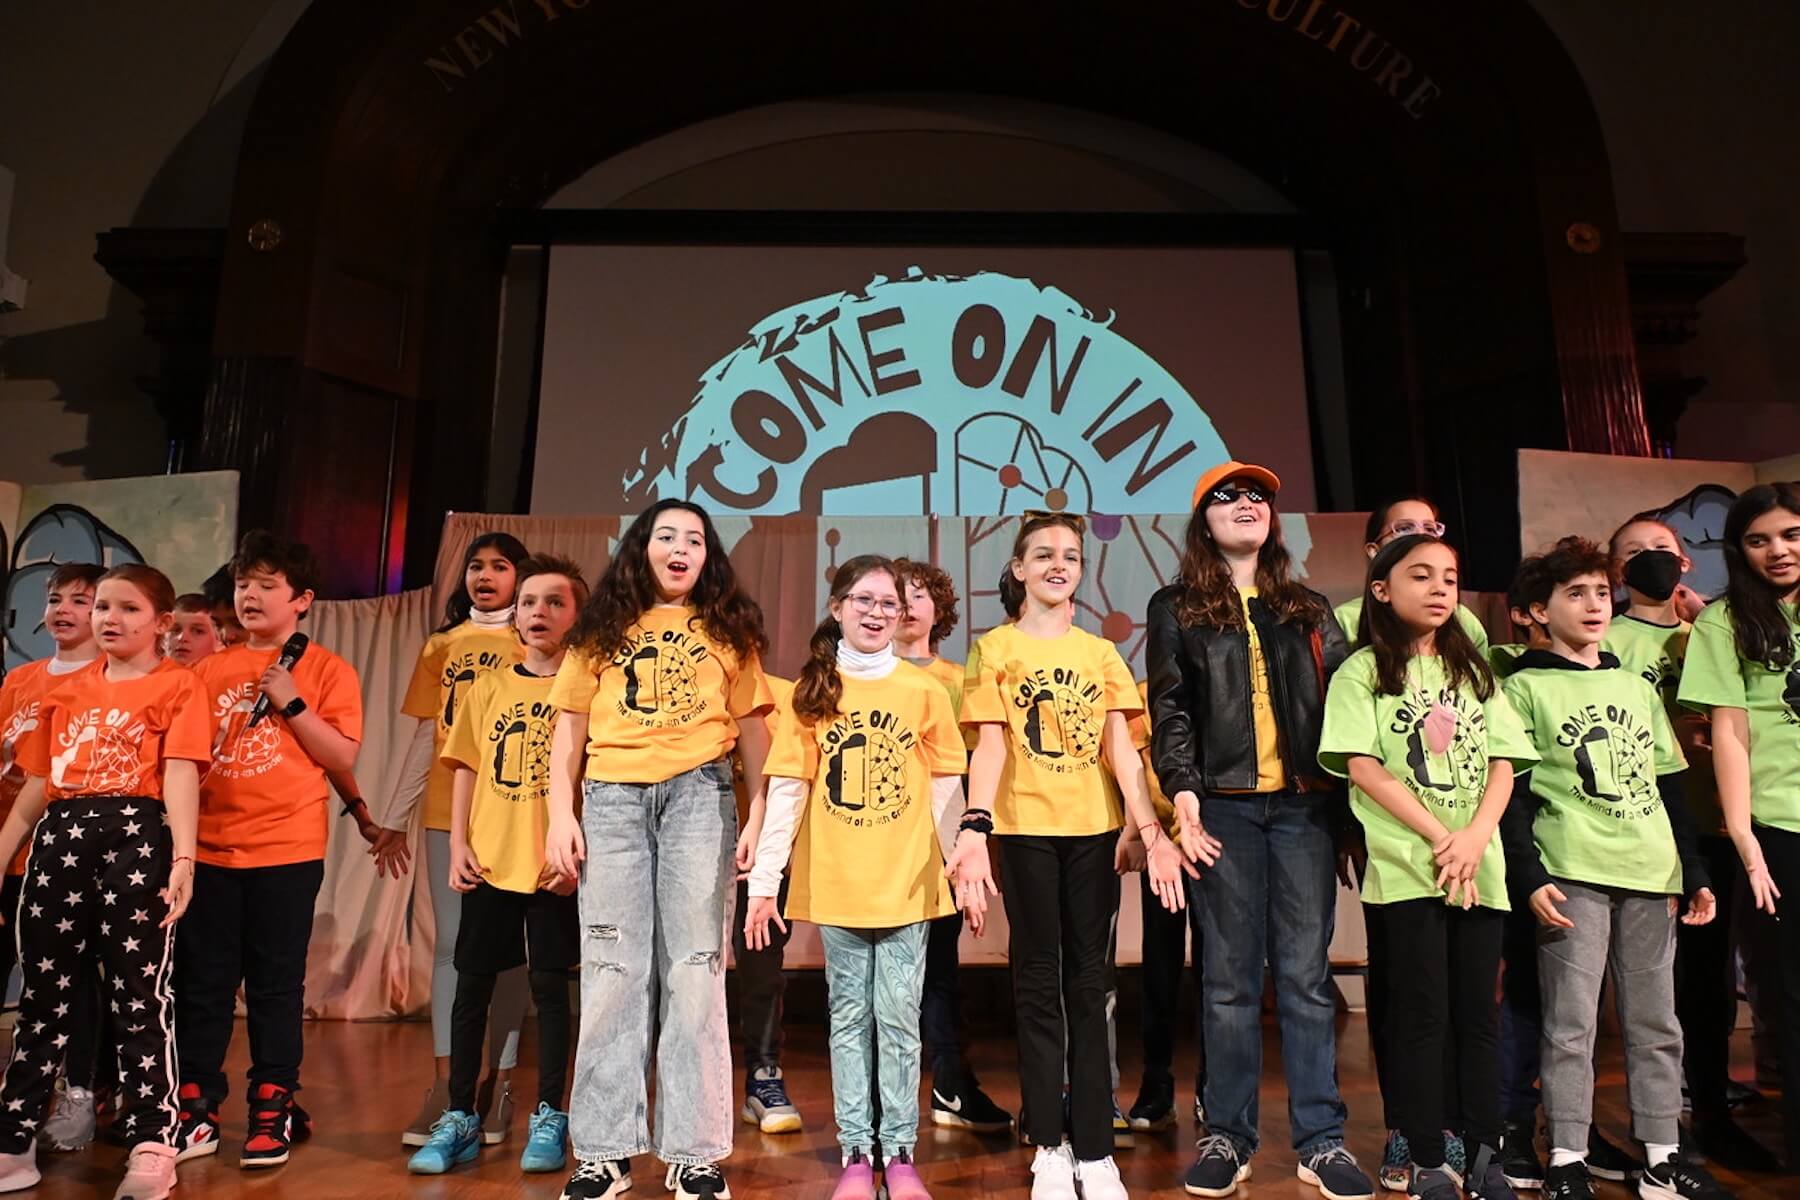 Ethical Culture 4th Graders on stage at performance of "Come On In: The MInd of a 4th Grader."